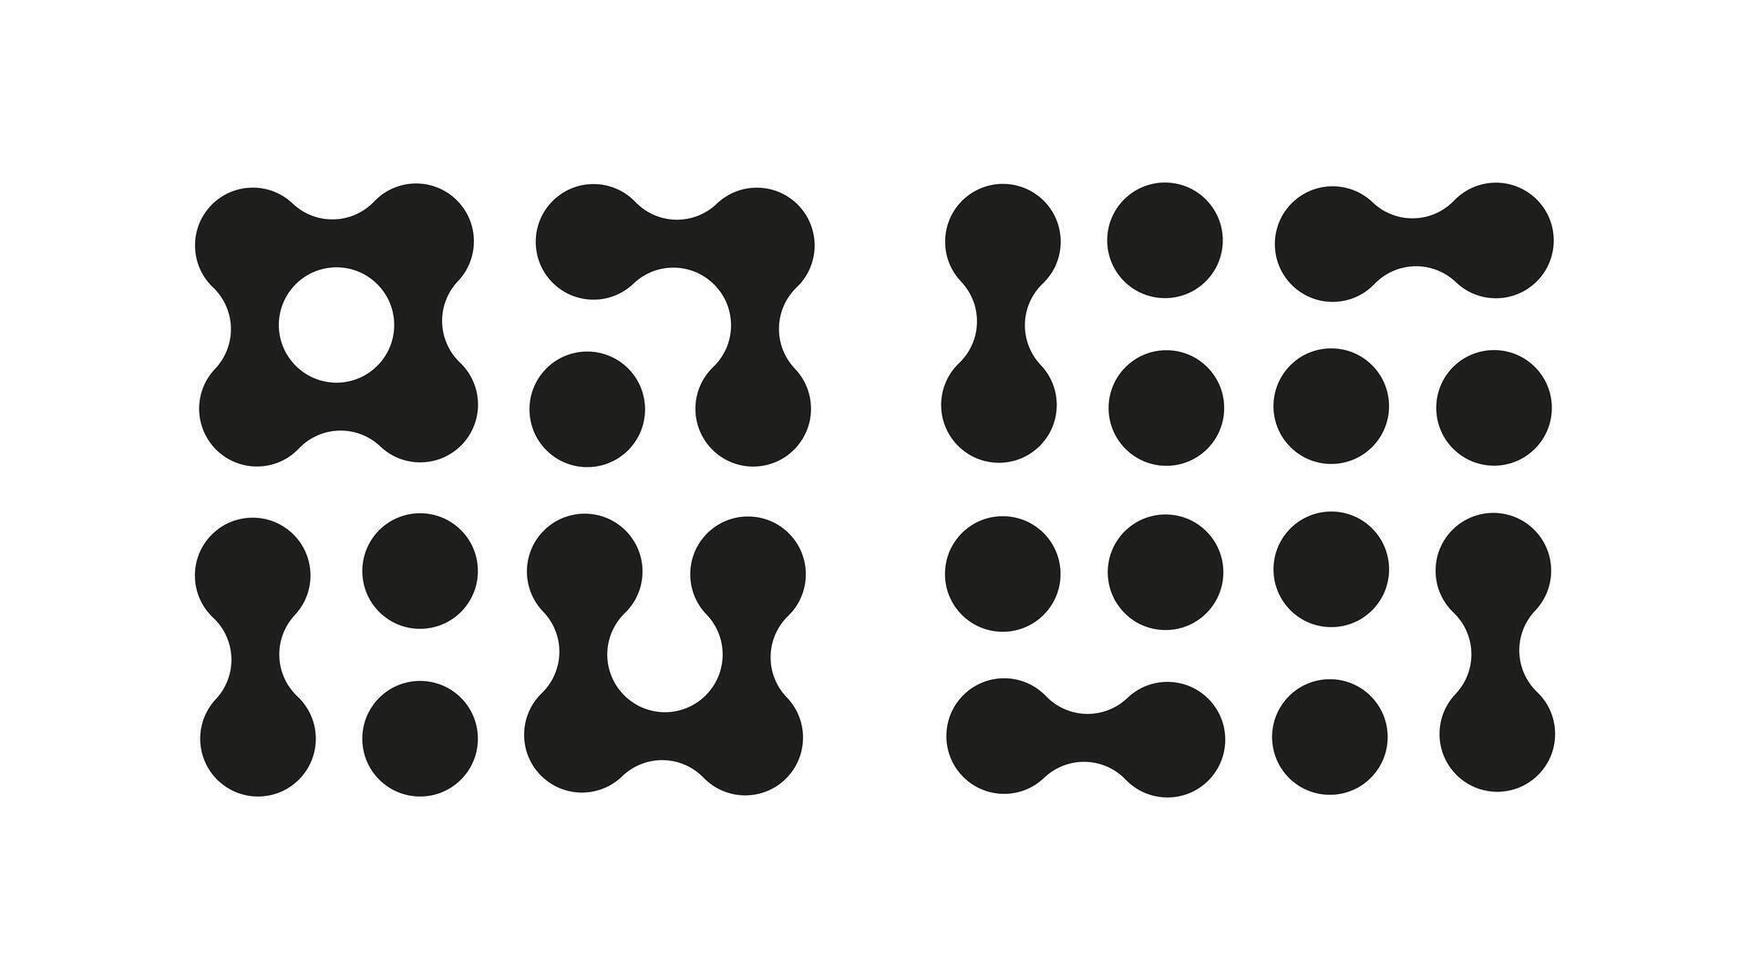 Connected dots vector signs. Innovation abstract symbol. Circles simple organic pattern. Metaball icons. Point movement. Connected blobs. Metaballs transition. Set of flat logos.